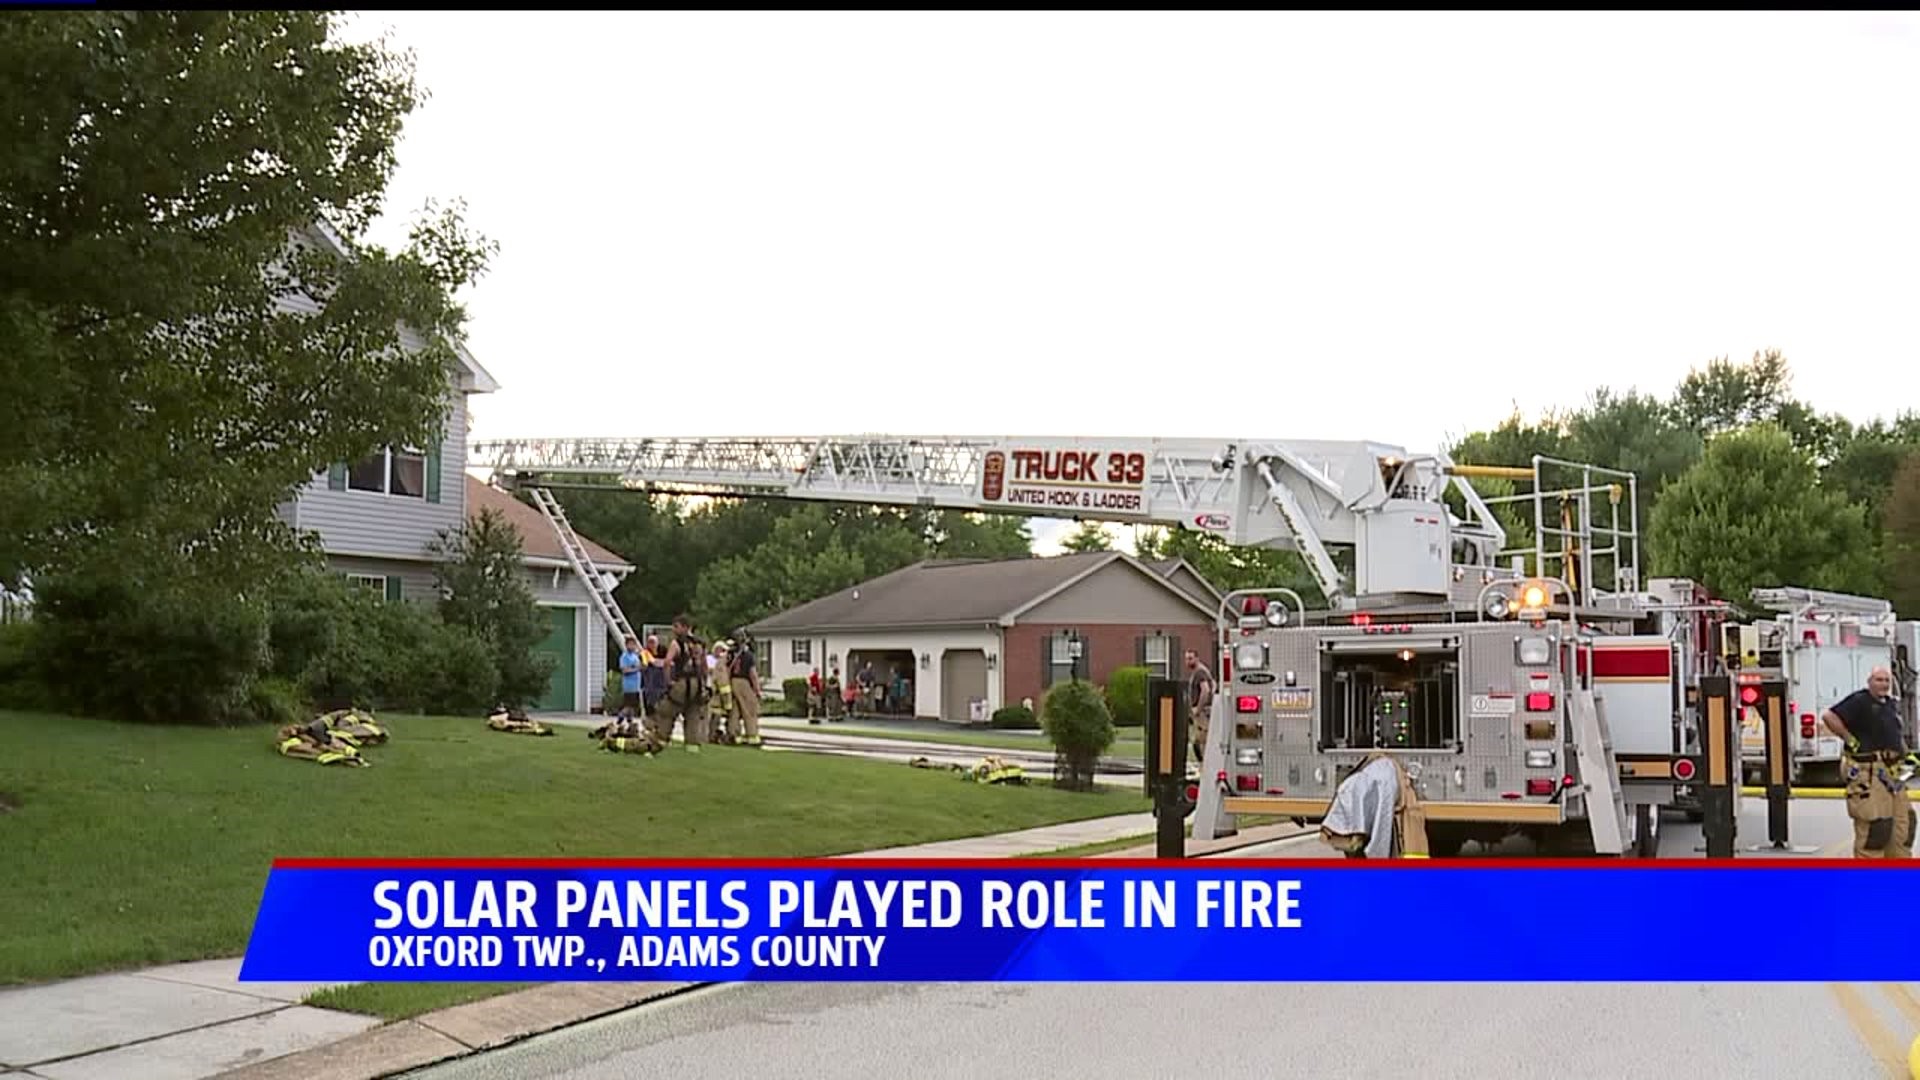 Solar panels played a role in Adams County fire, officials say